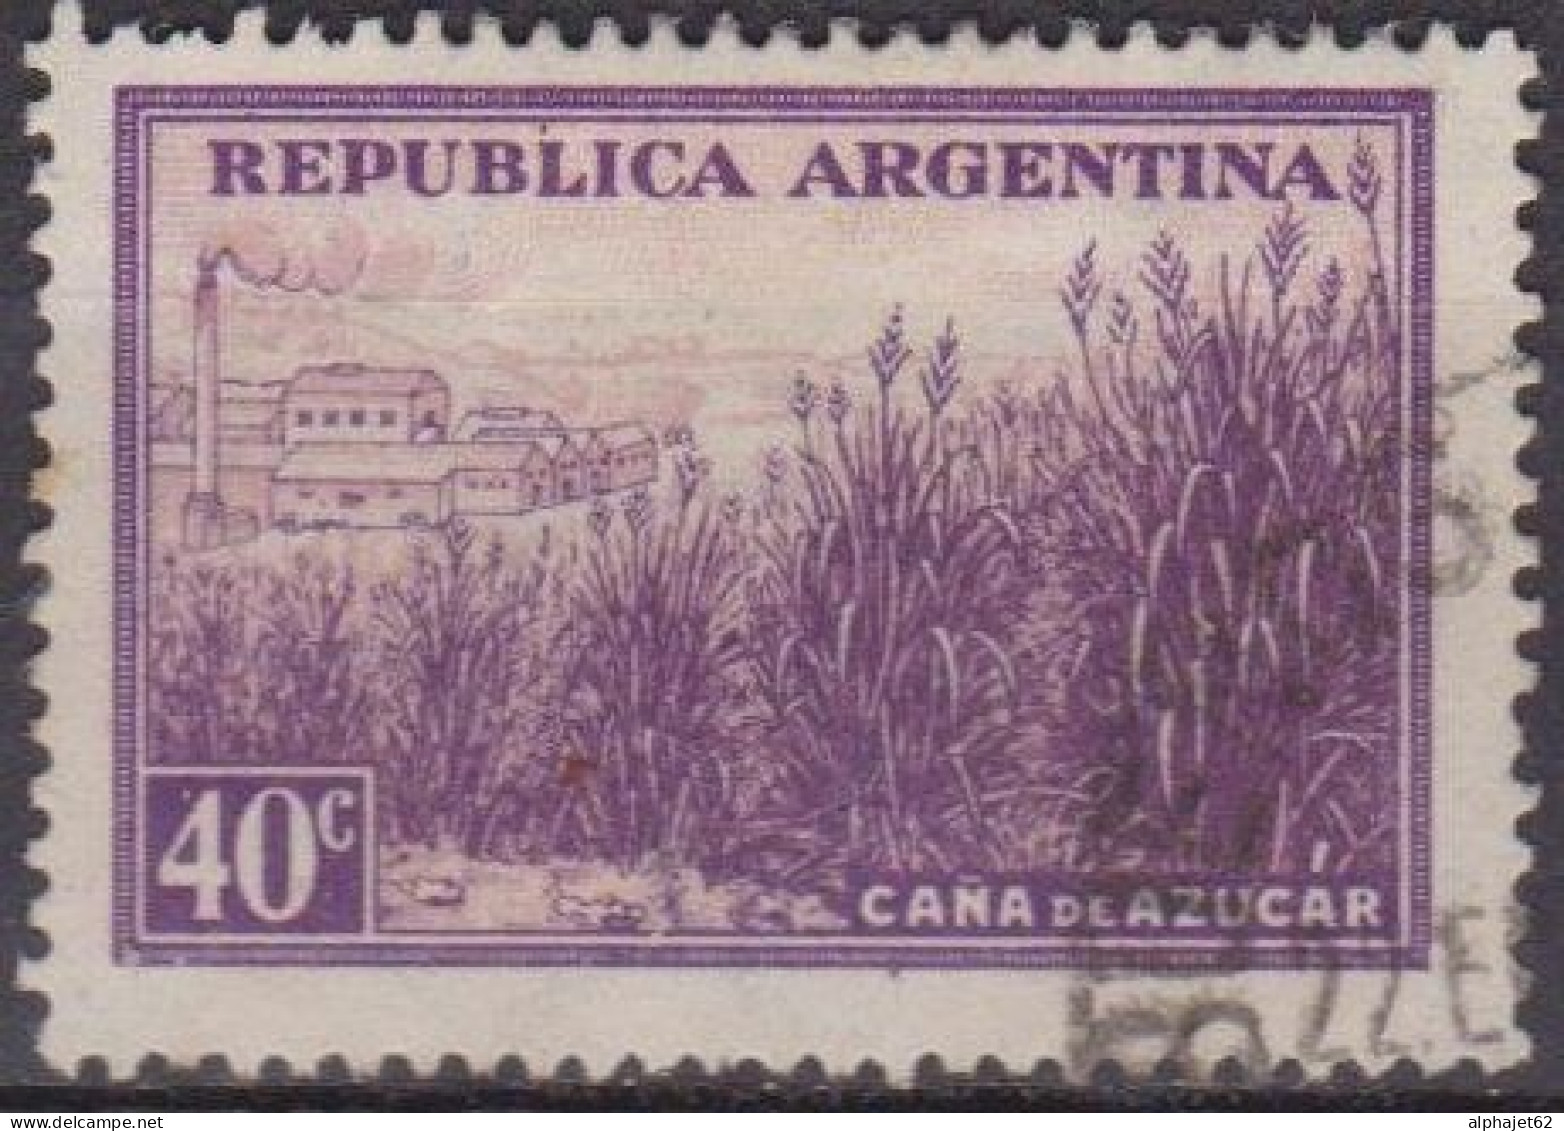 Economie - Agriculture - ARGENTINE - Canne à Sucre - N° 378 - 1935 - Used Stamps